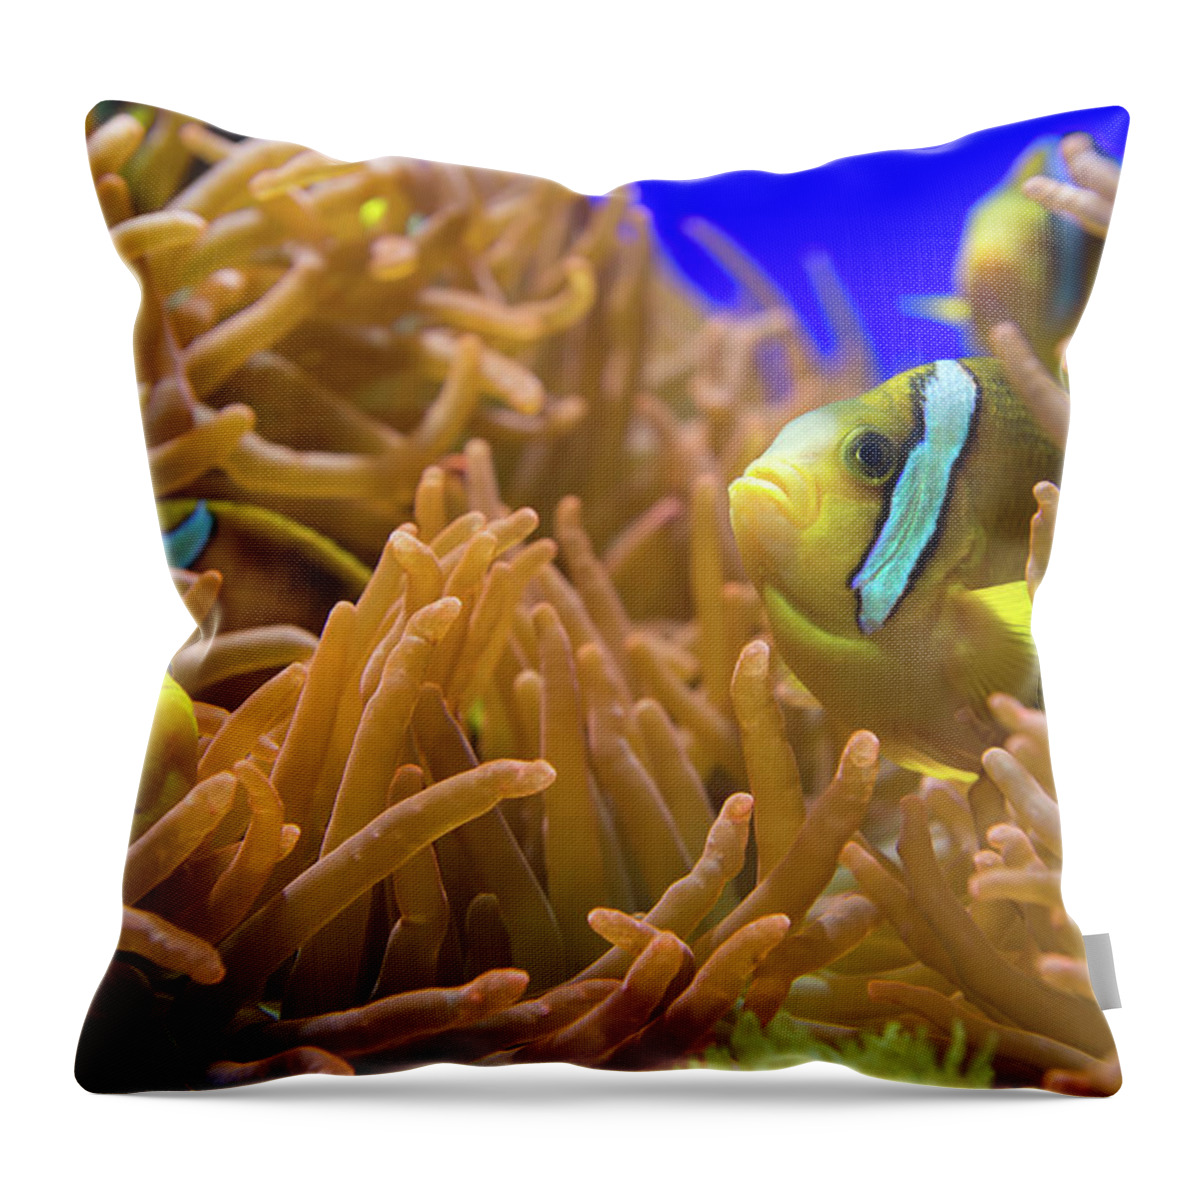 Underwater Throw Pillow featuring the photograph Clarks Anemonfish - Amphiprion Clarkii by Cruphoto